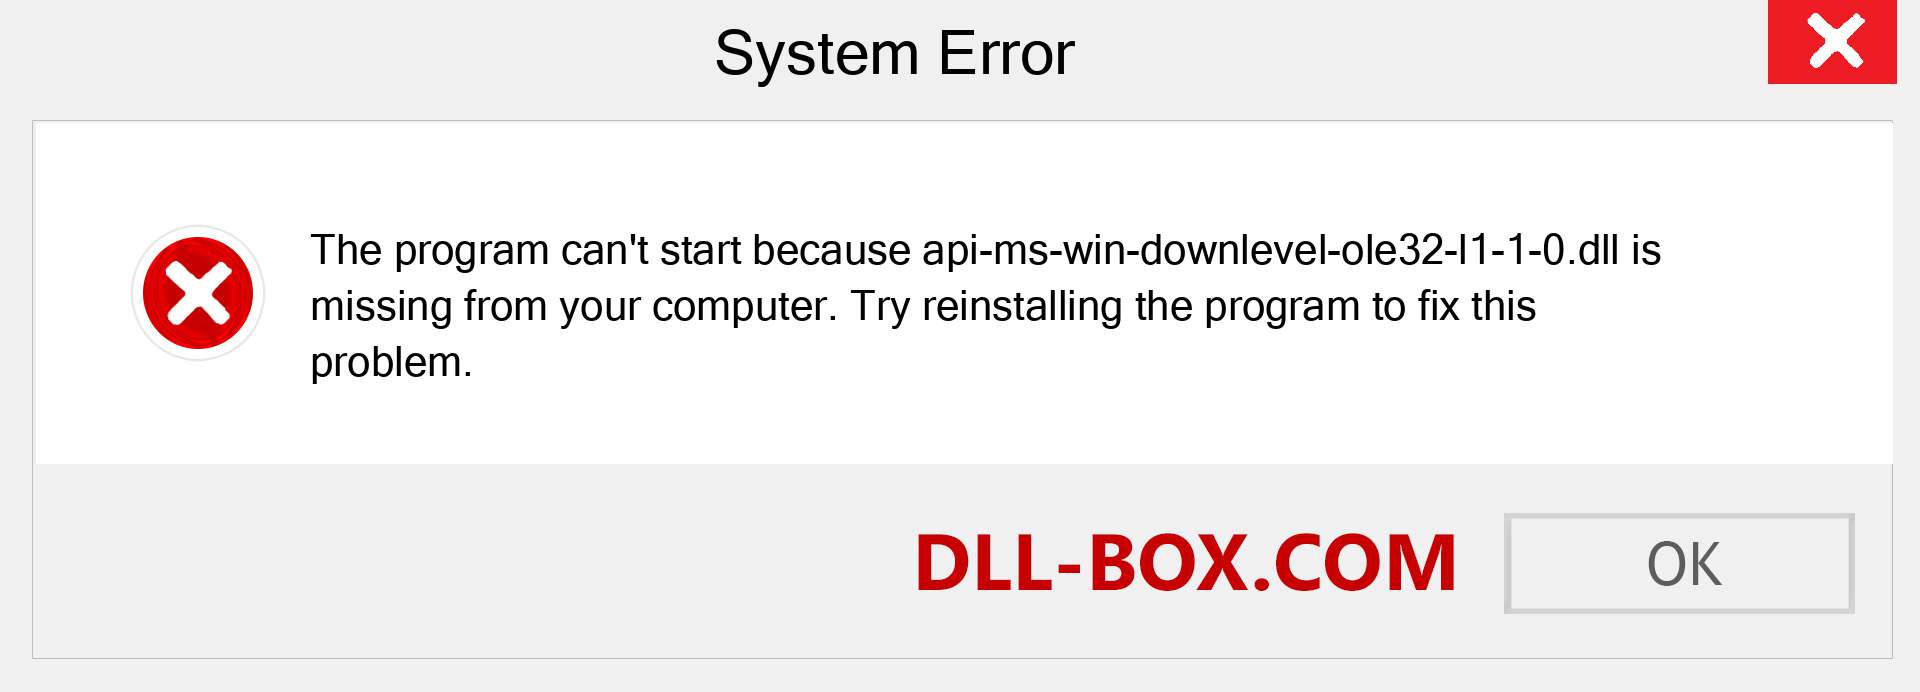  api-ms-win-downlevel-ole32-l1-1-0.dll file is missing?. Download for Windows 7, 8, 10 - Fix  api-ms-win-downlevel-ole32-l1-1-0 dll Missing Error on Windows, photos, images